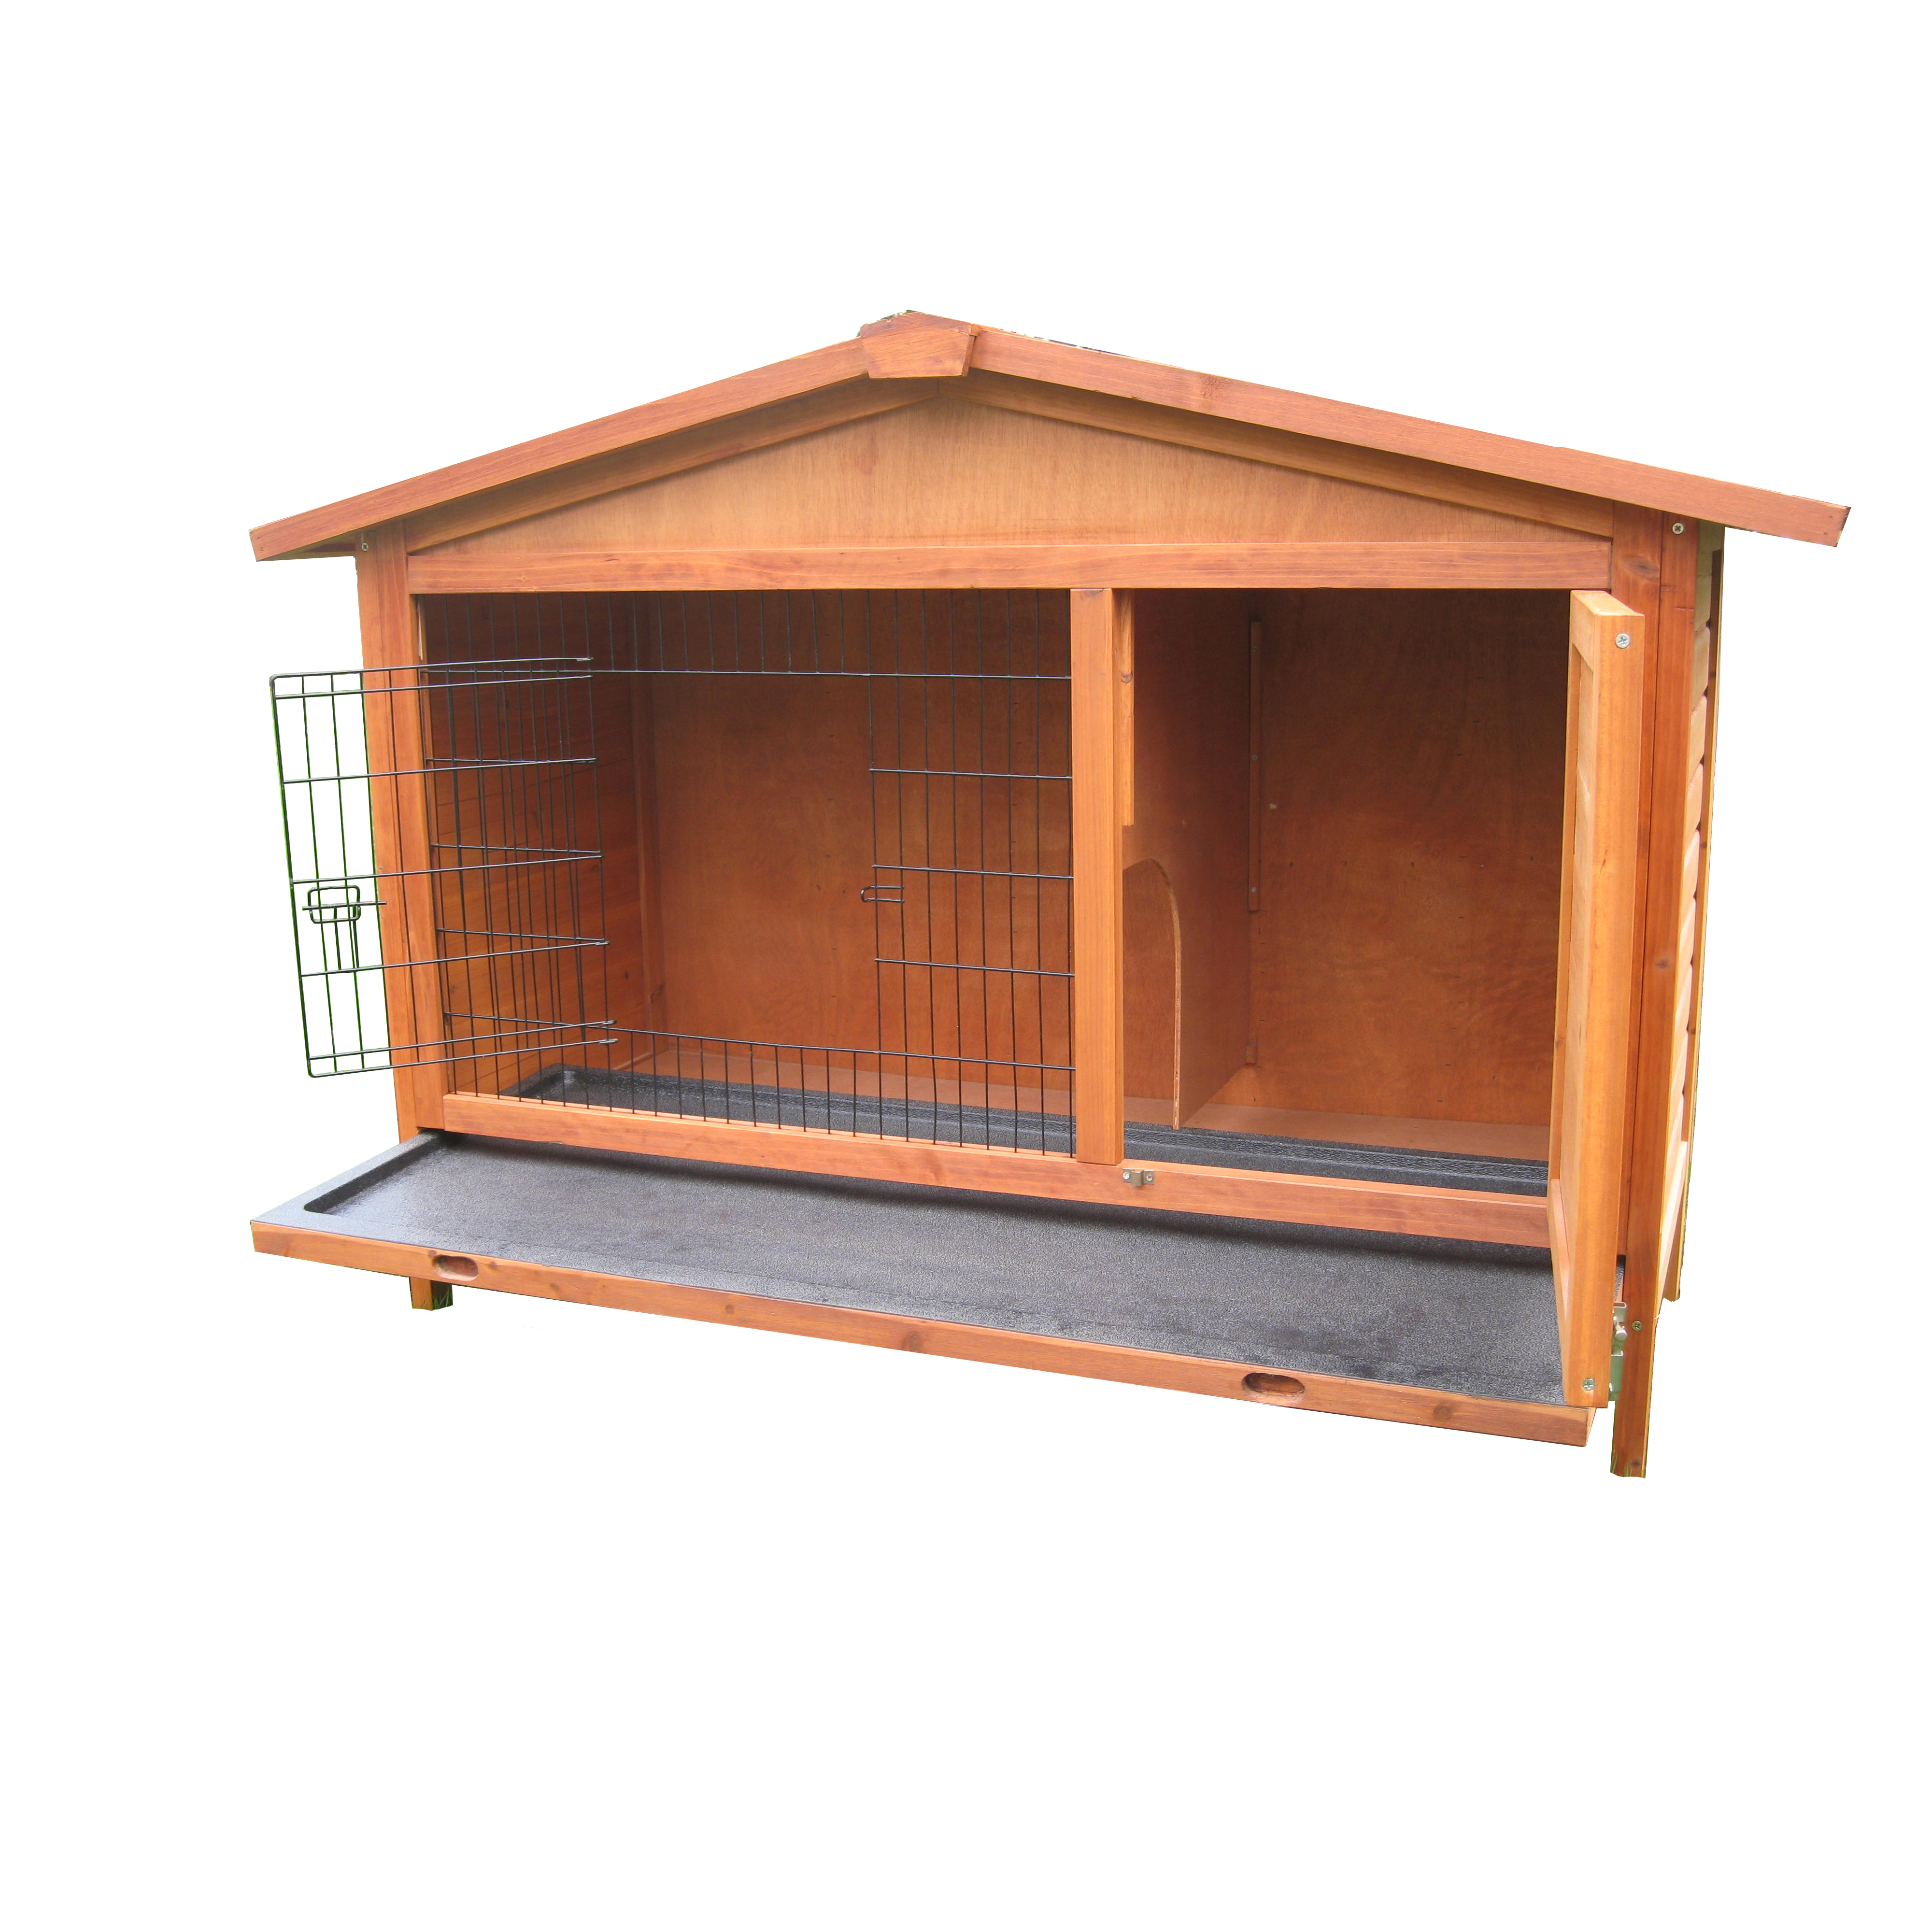 Big Discount Outdoor Dog Kennel -
 fir wood easy assembled eco friendly outdoor Wooden Metal Floor Wood Rabbit Cage bunny house Sale – Easy